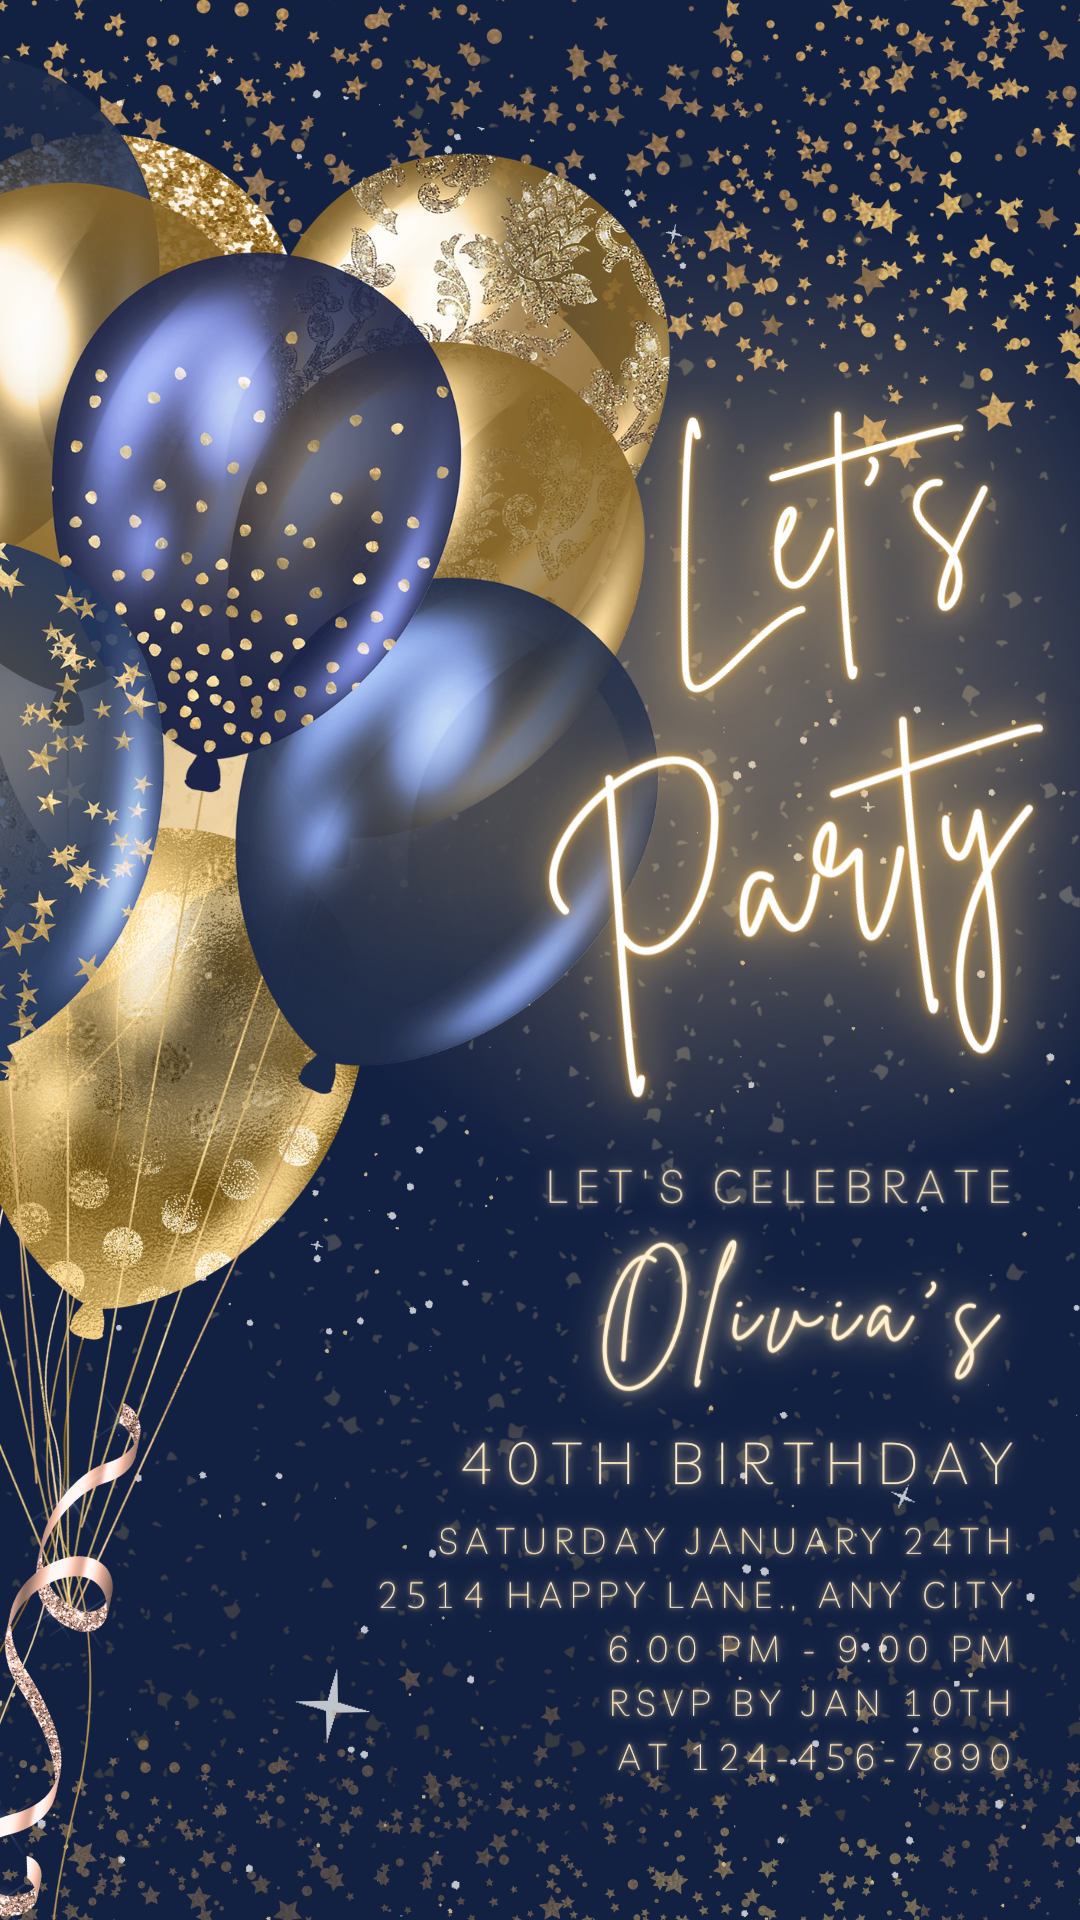 Animated Let's Party Invite for any Event Celebration, Editable Video Template, Birthday invitation for any Age | Golden & Blue E-vite